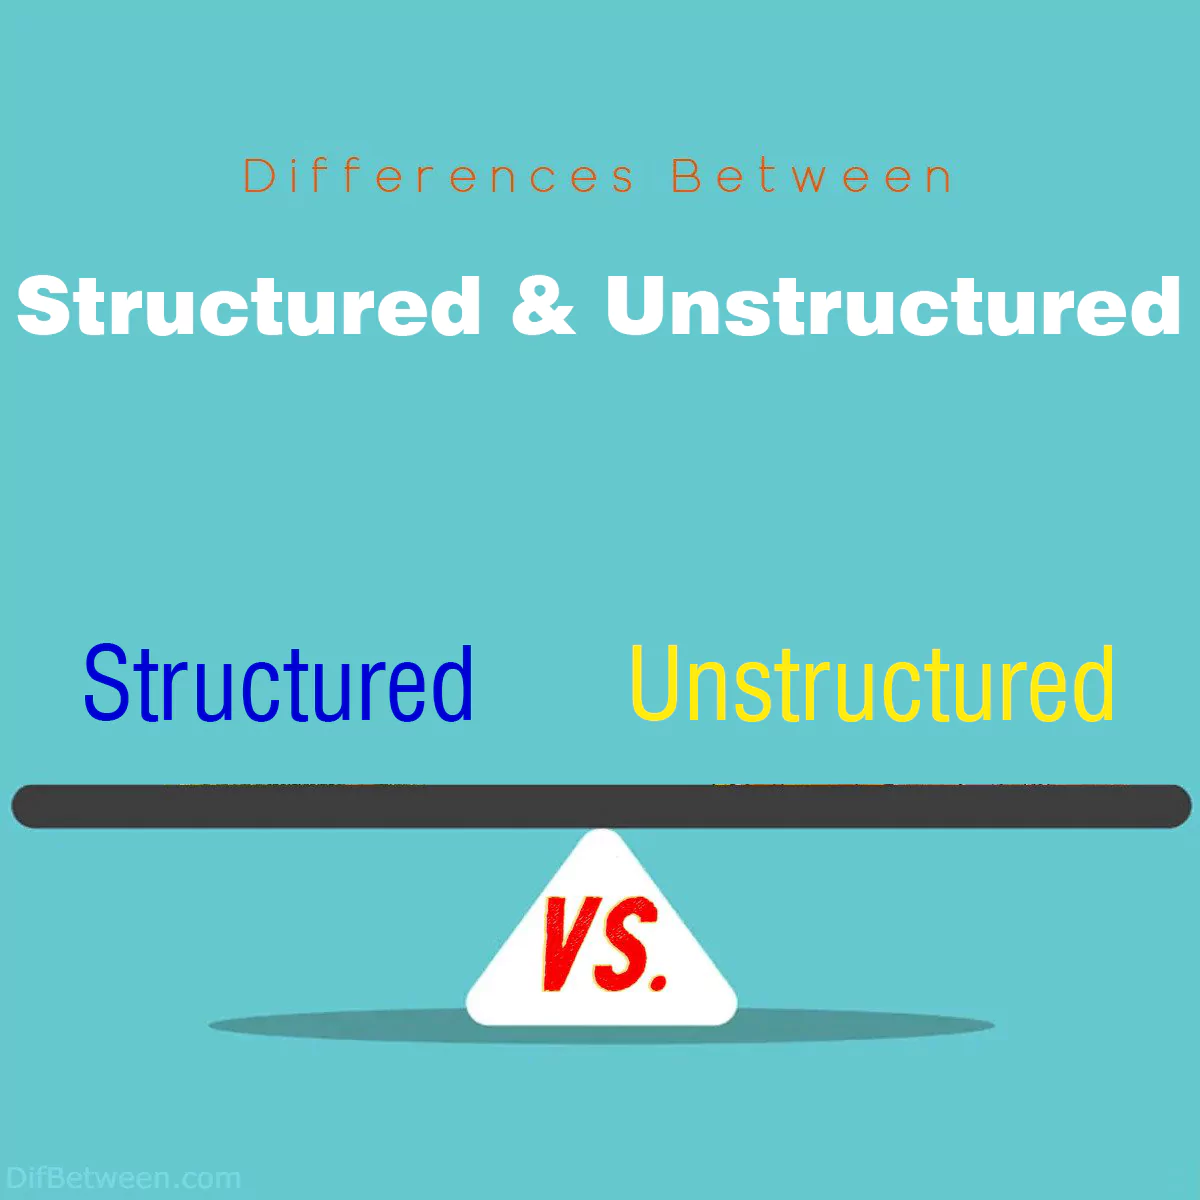 Differences Between Structured and Unstructured